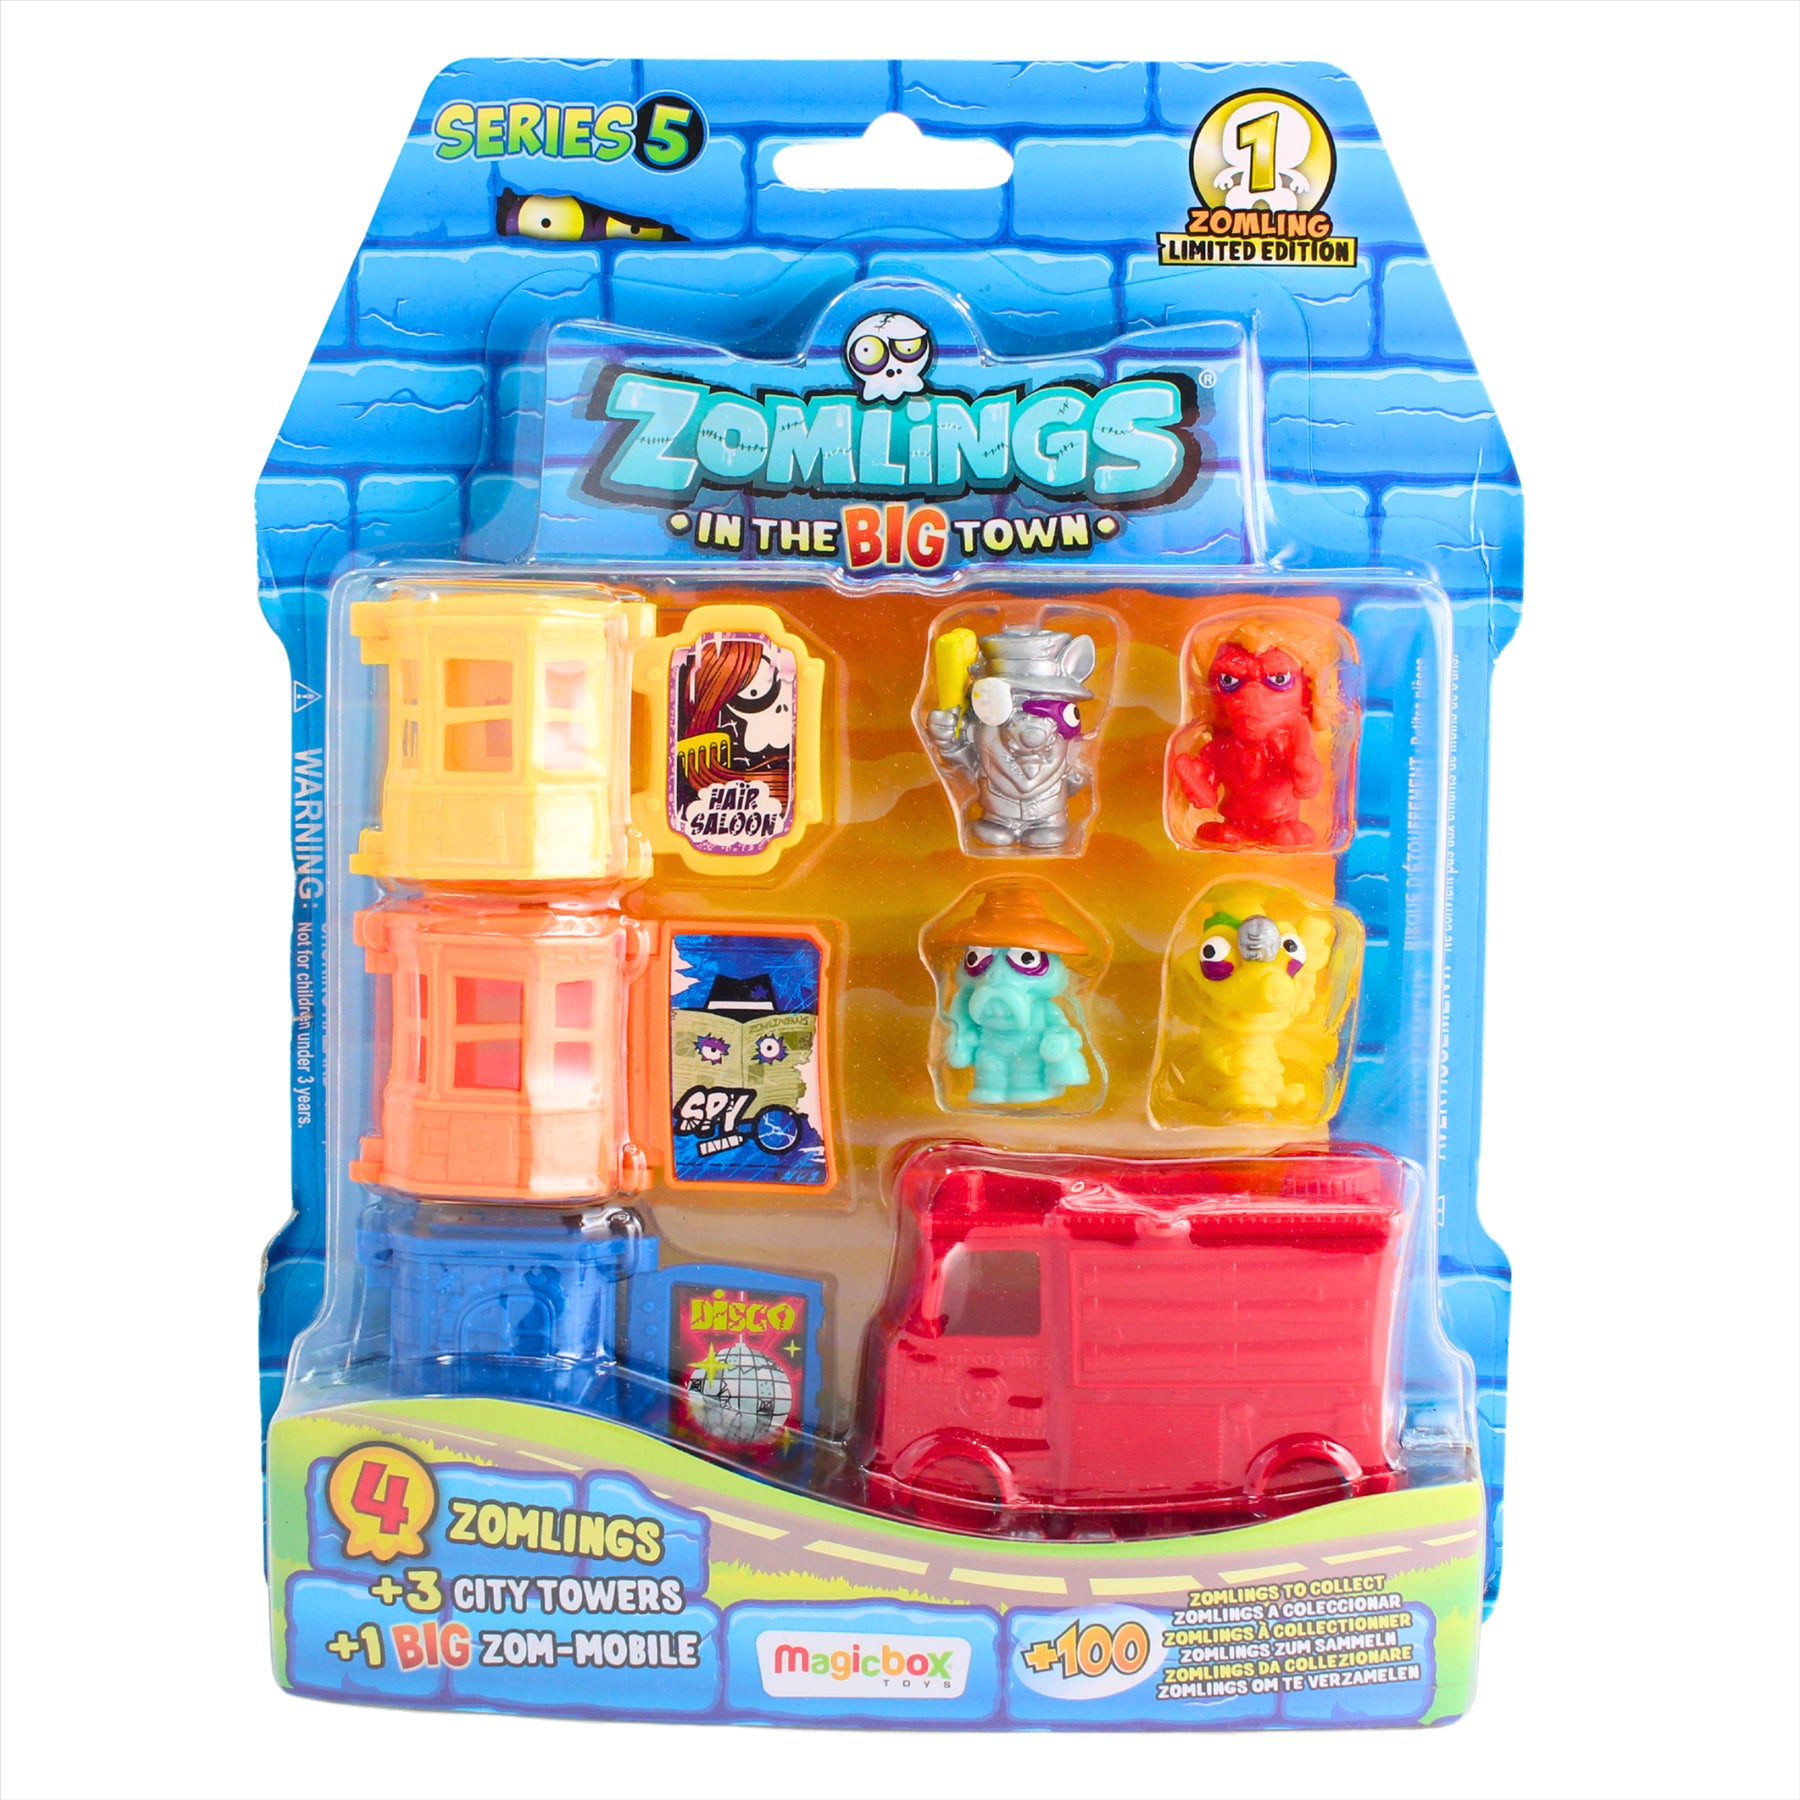 Zomlings Mega-Pack - 3x Buses, 2x Service Vehicles, 1x Multipack of 4 Zomlings, Fire Engine, and Accessories - 14 Zomlings Total - Pack of 6 - Toptoys2u